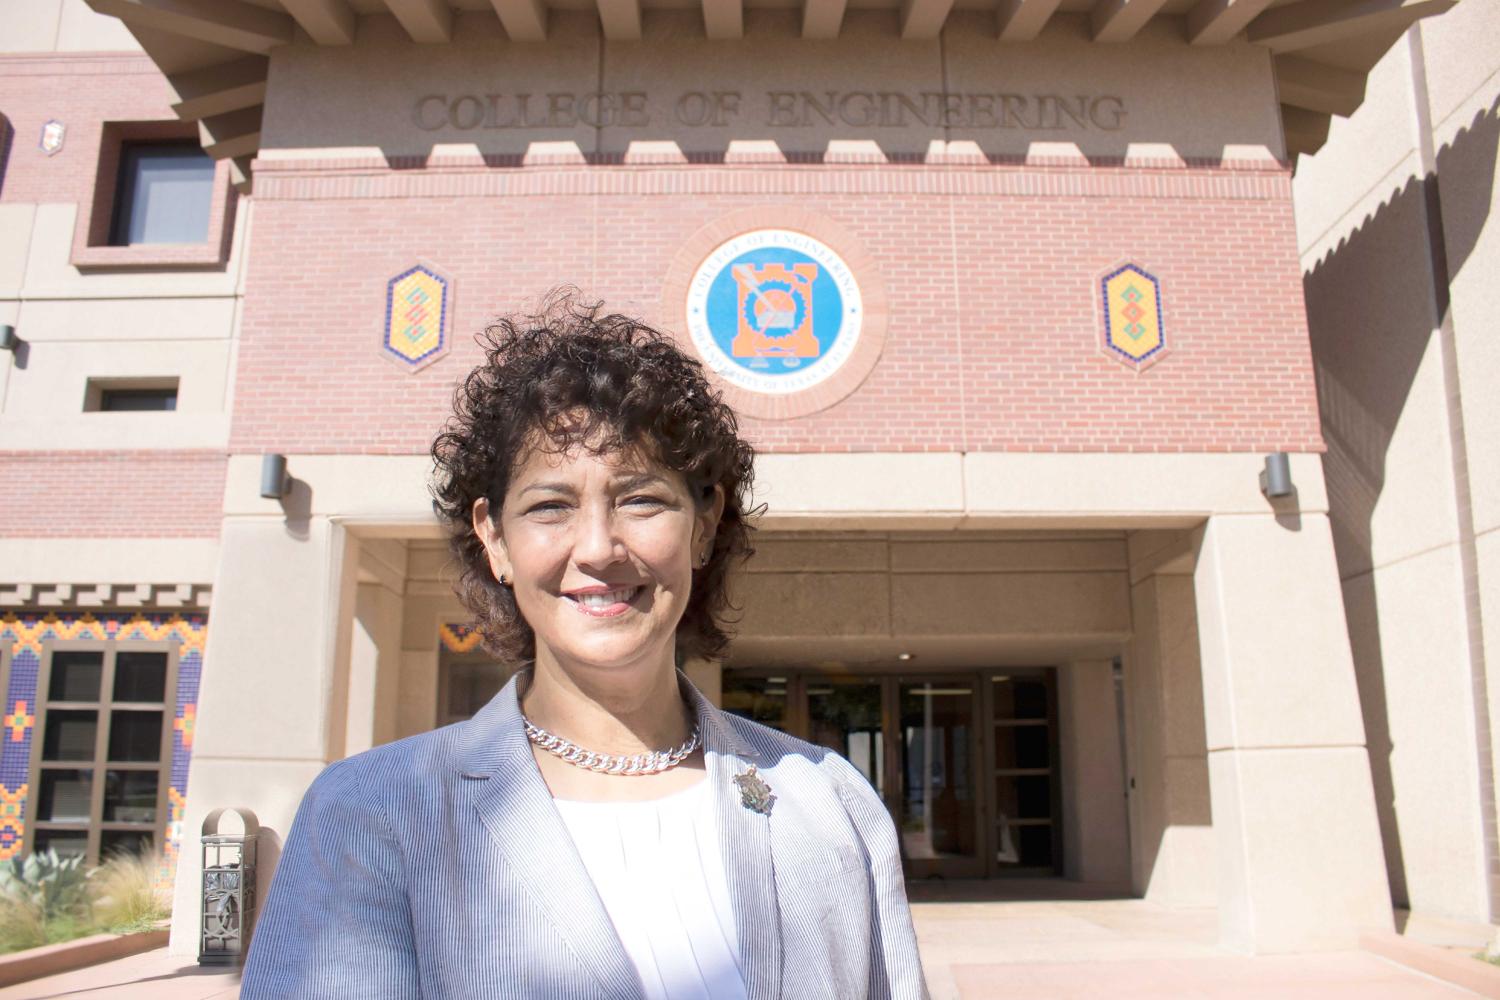 Theresa Maldonado served as associate dean of engineering at Texas A&M prior to being hired by UTEP. 